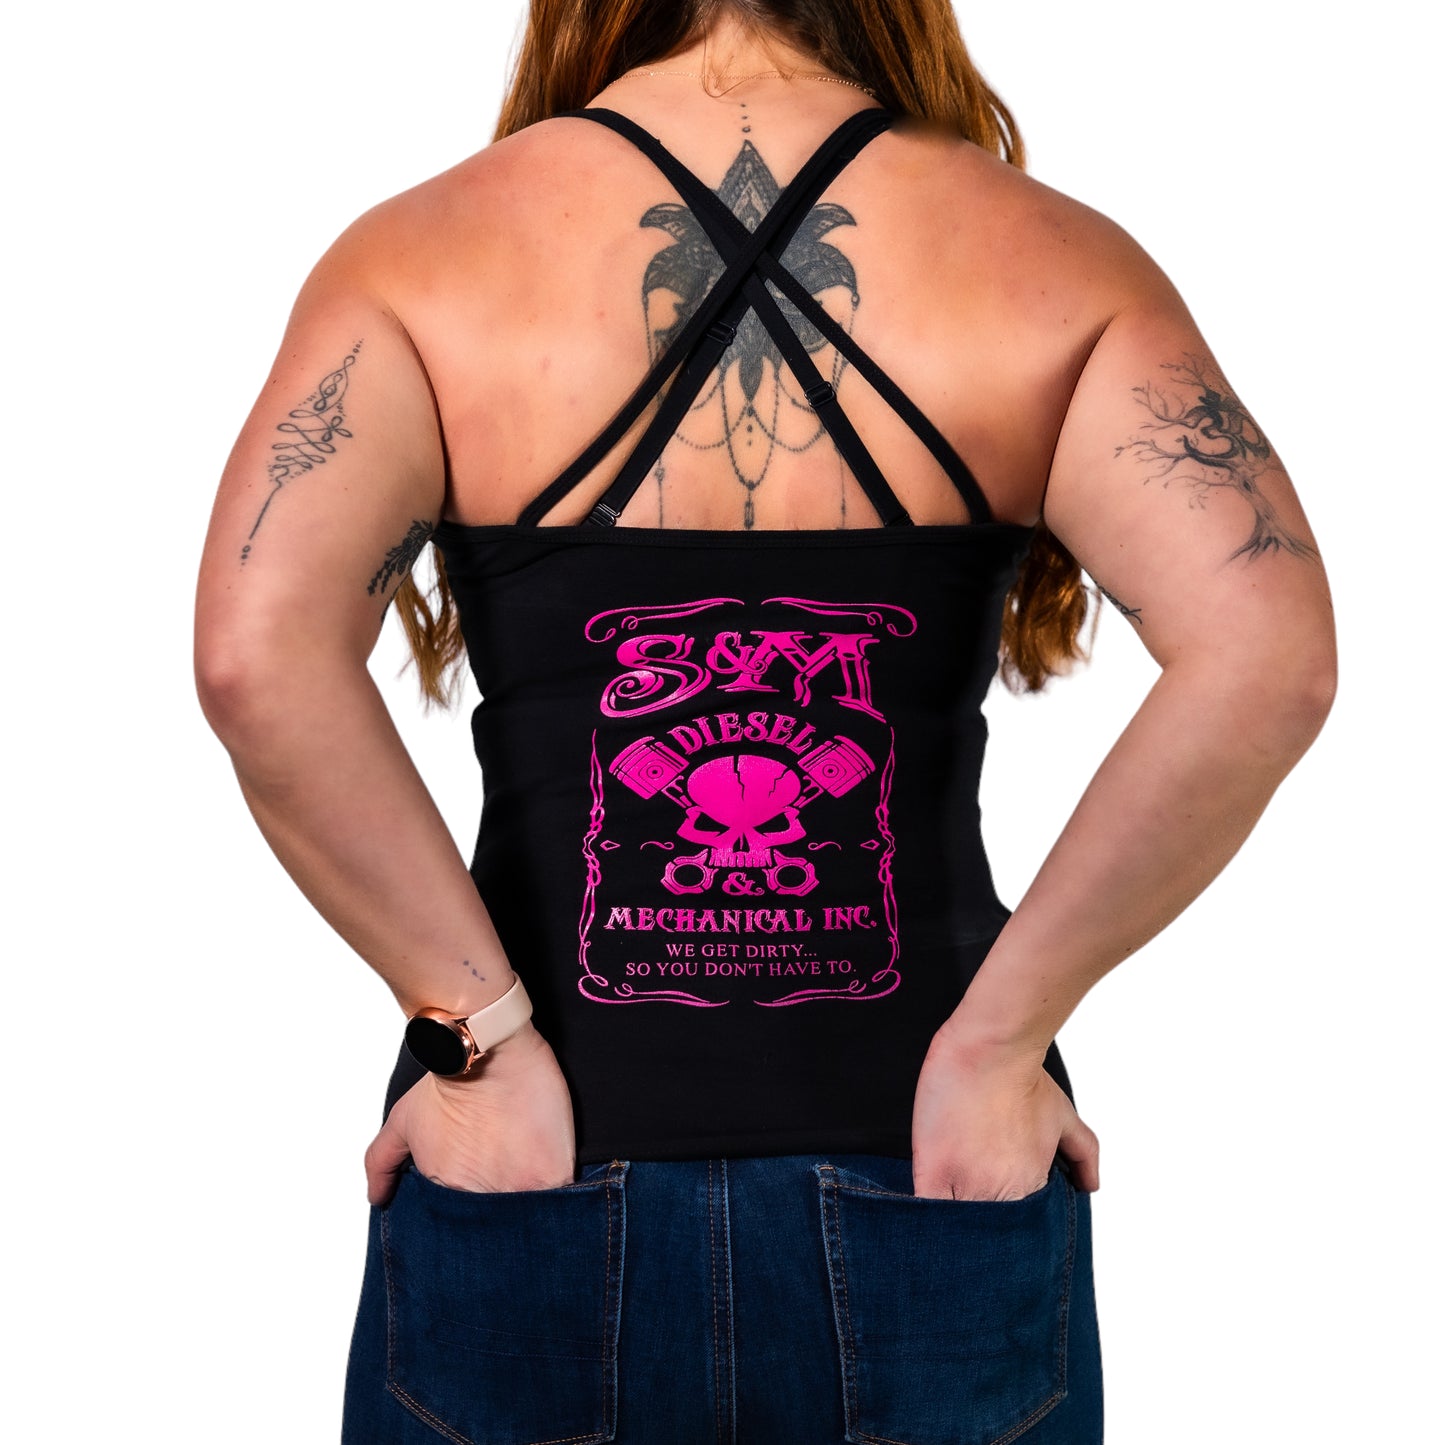 S&M Diesel Woman’s cross-back tank top- 5 color options avail